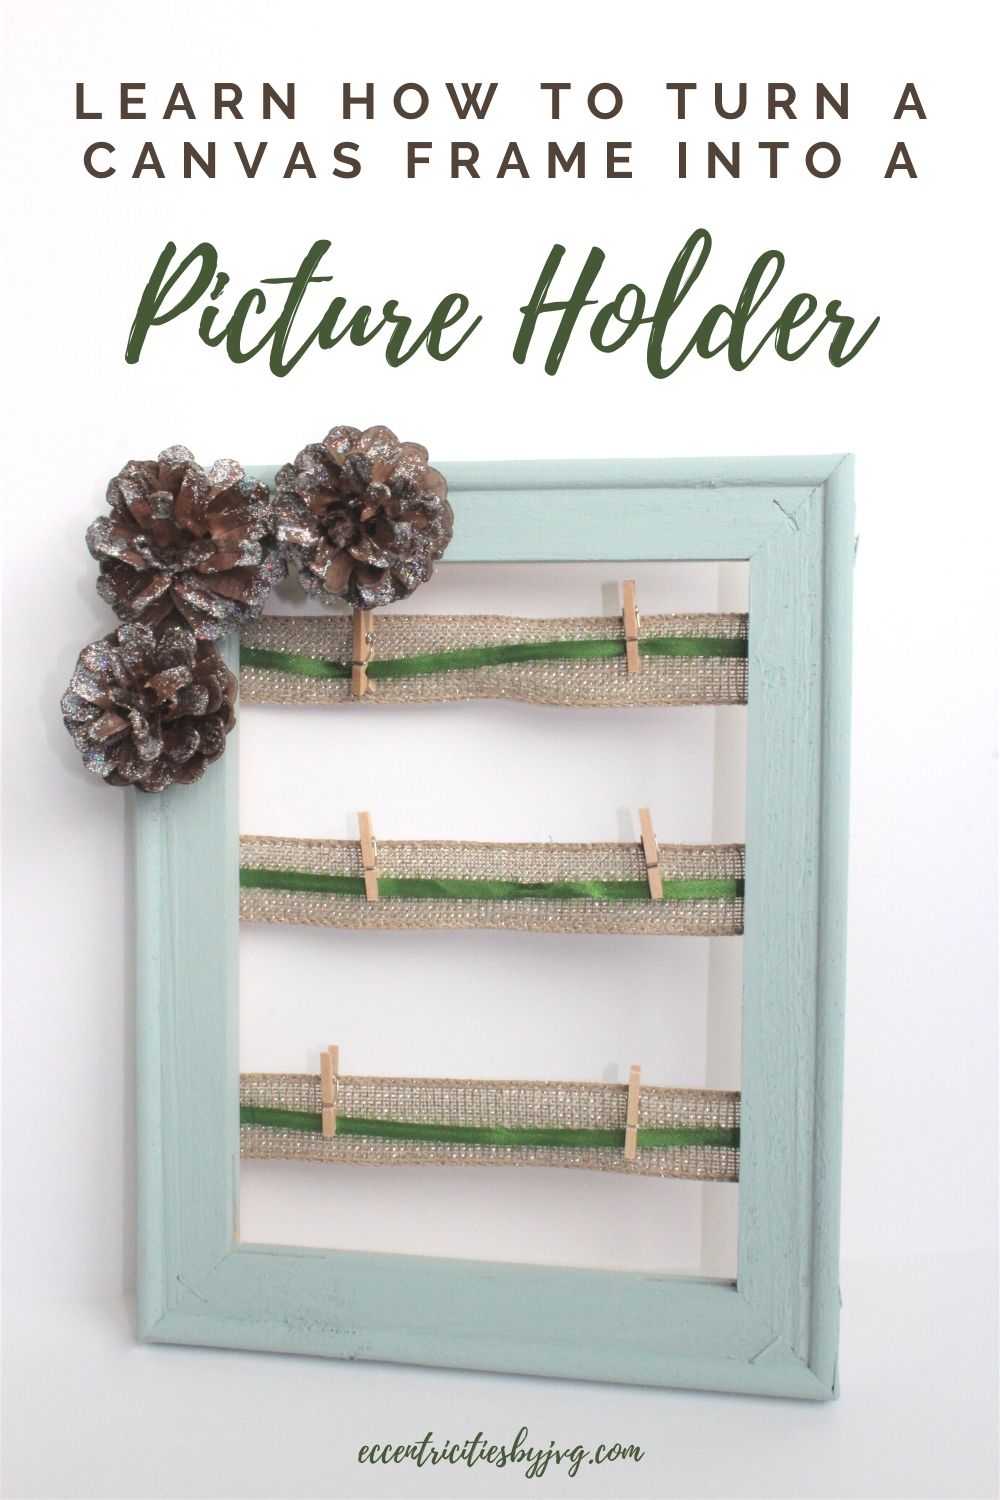 Turn a Canvas Frame into a Beautiful Picture Holder